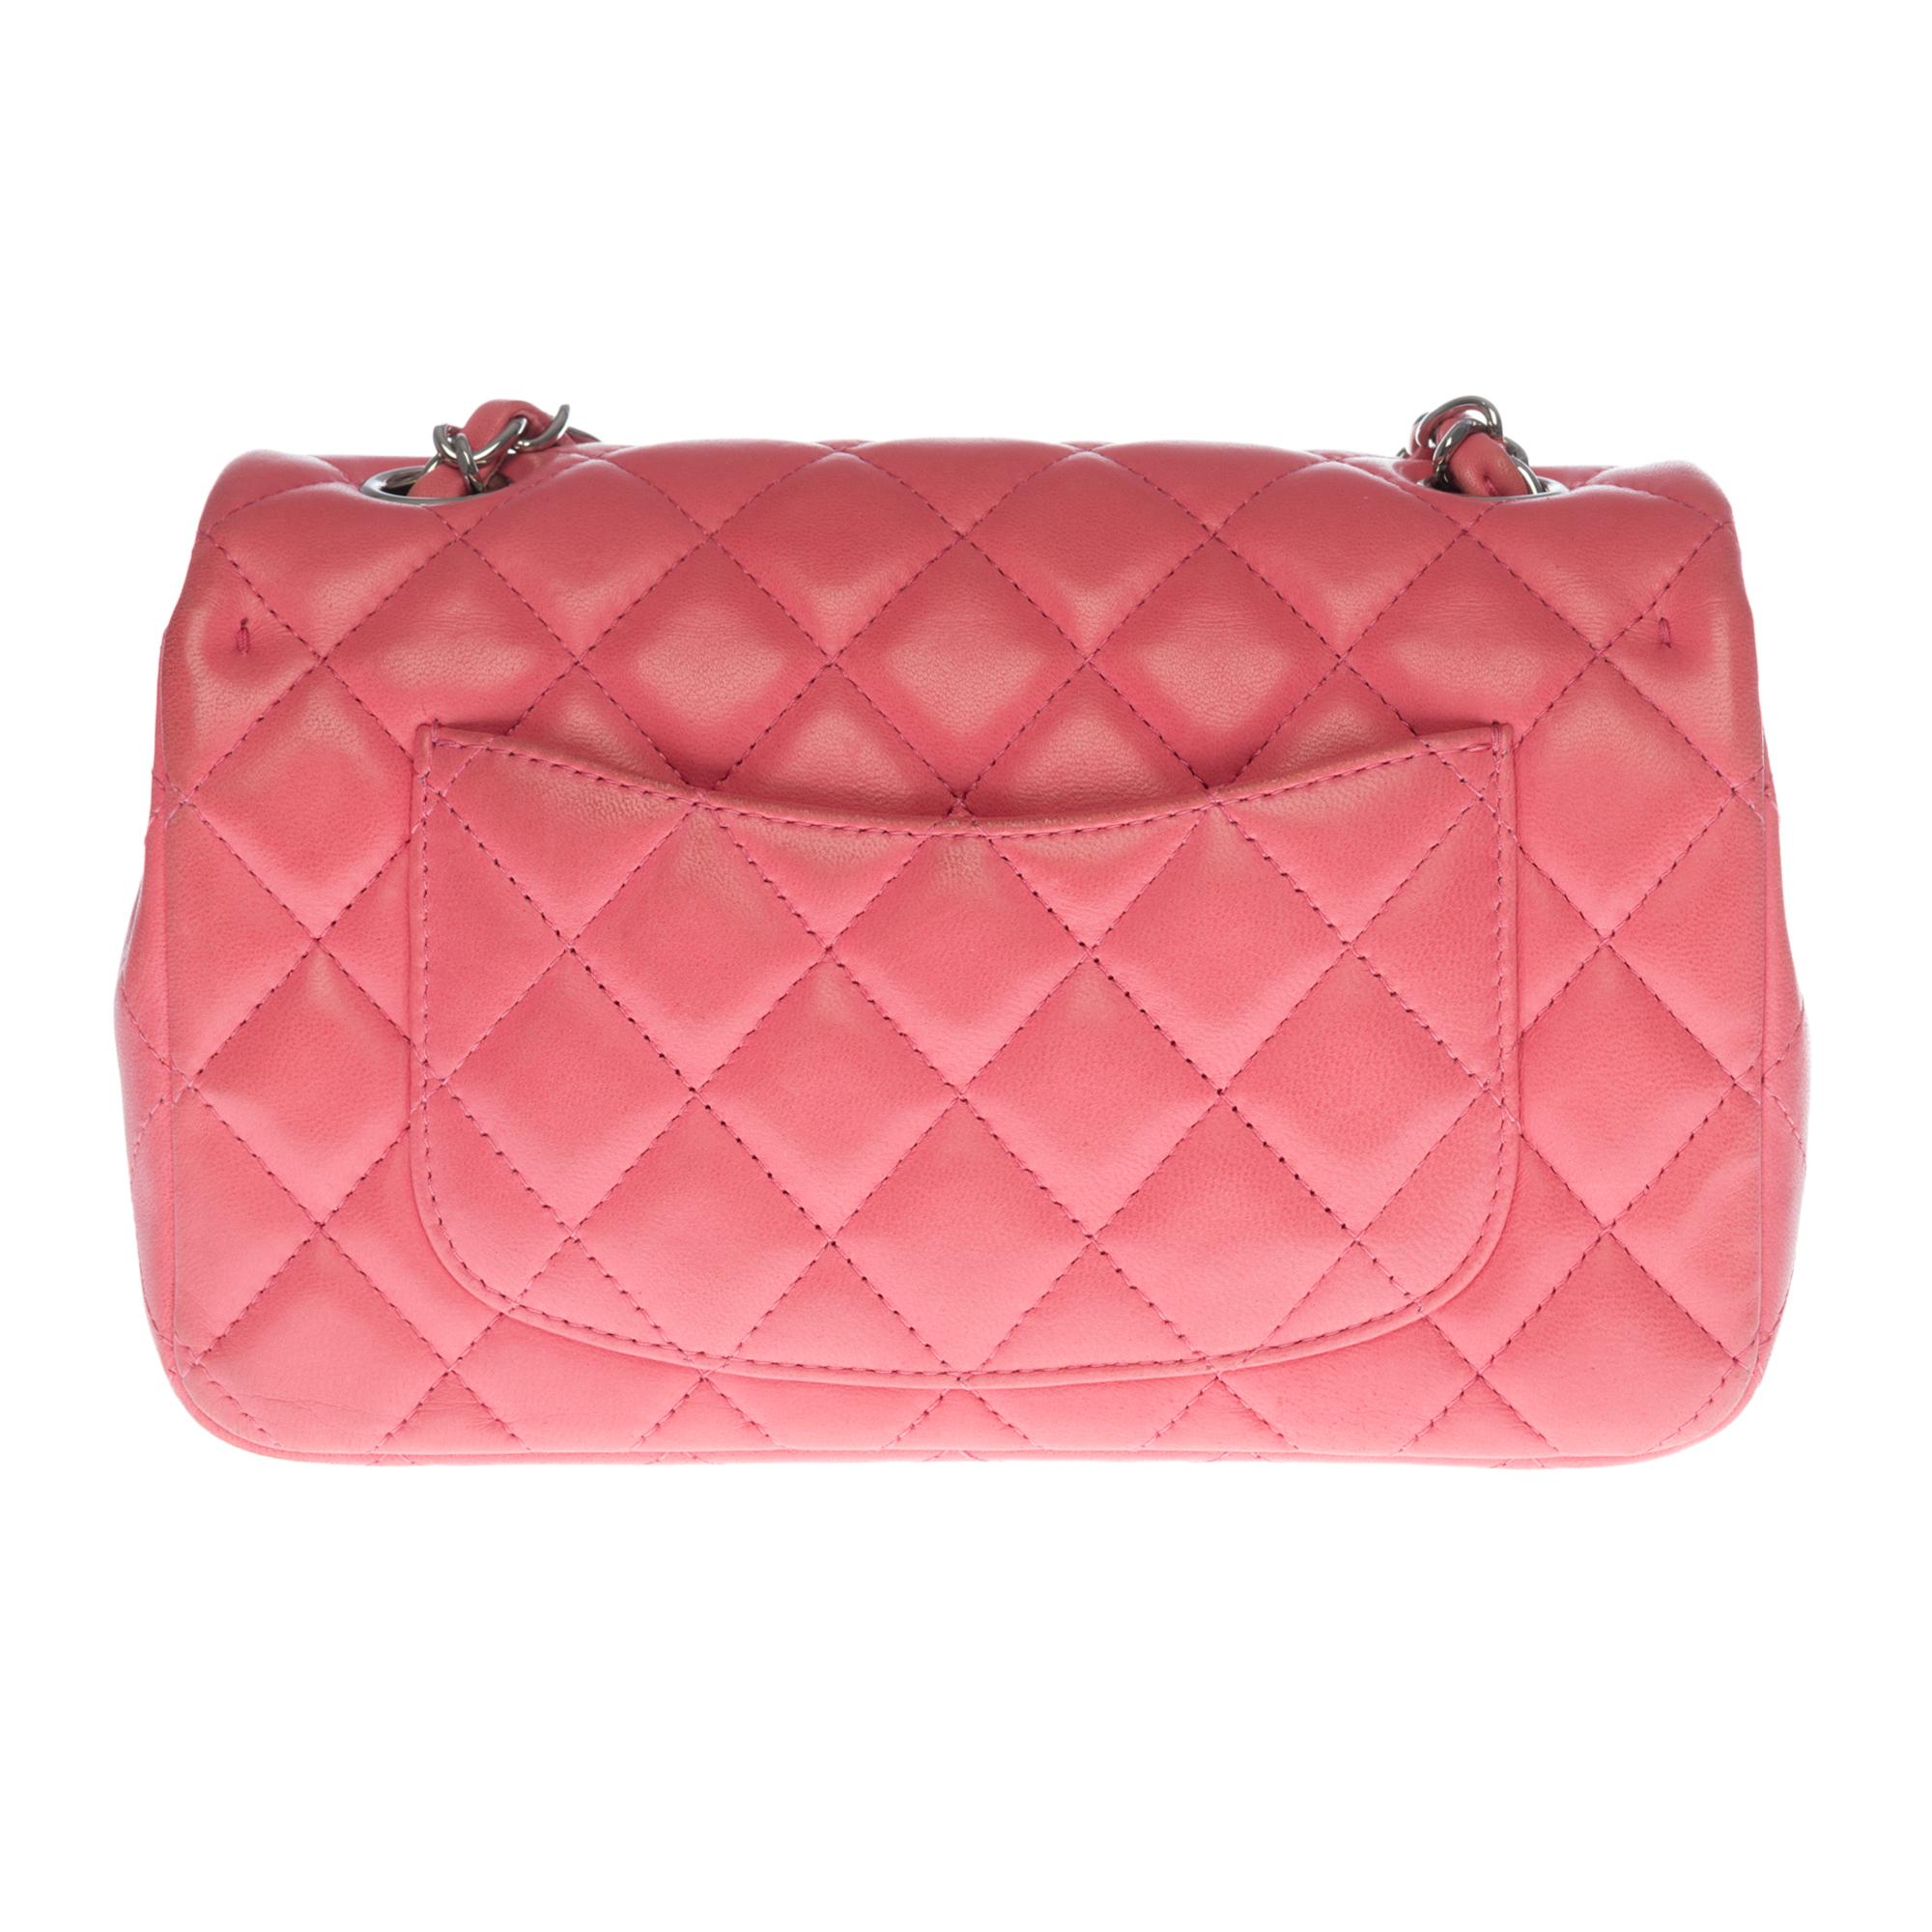 The stunning Chanel Mini Timeless shoulder bag in pink quilted leather, silver metal hardware, silver metal chain handle intertwined with pink leather allowing a shoulder or shoulder strap
Flap closure
A patch pocket on the back of the bag
Lining in